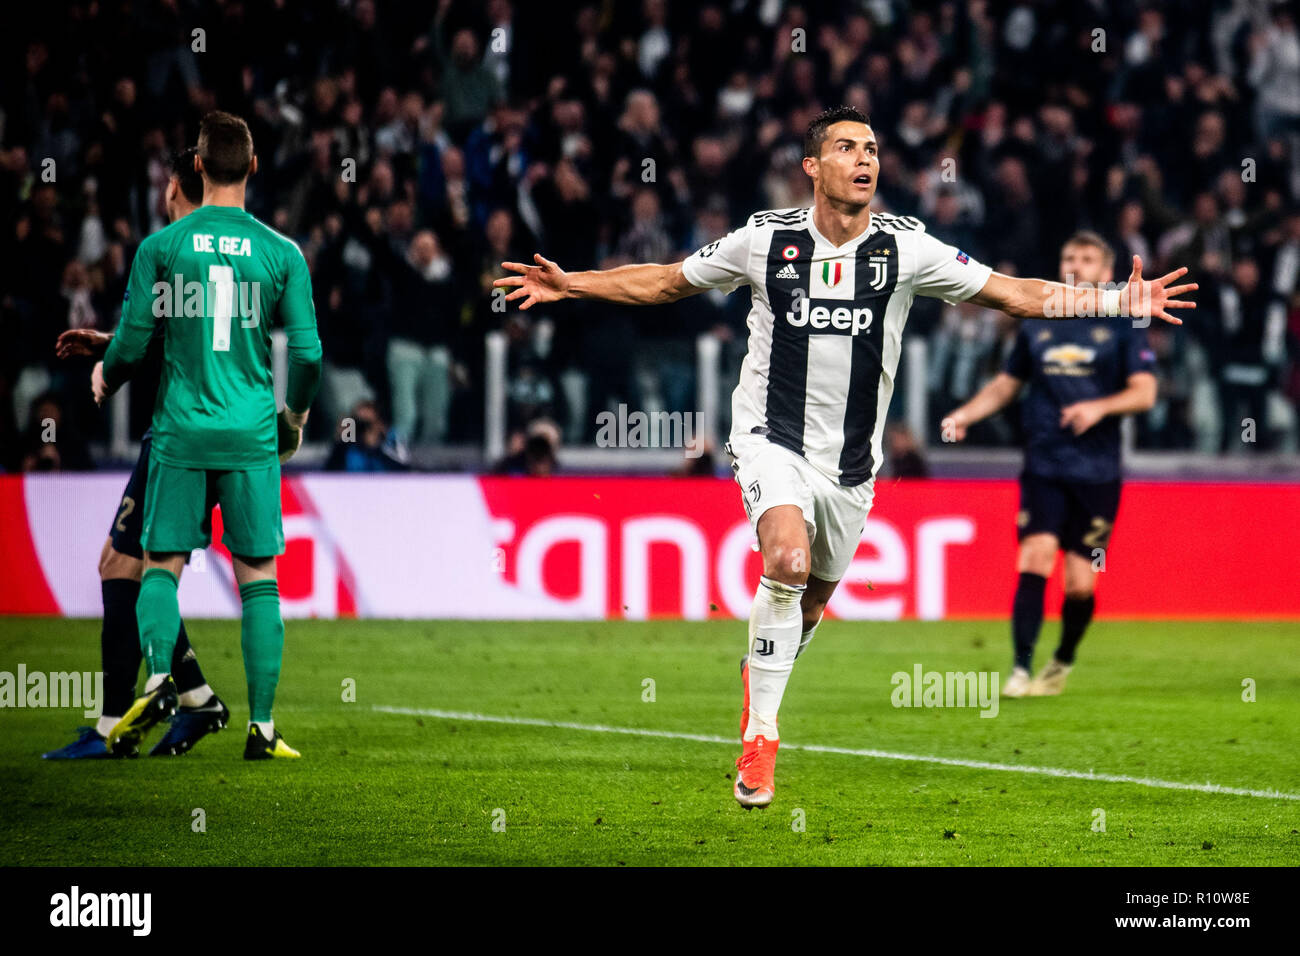 Turin, Italy. 07th Nov, 2018. Cristiano Ronaldo of Juventus celebrates during the UEFA Champions League match between Juventus and Manchester United at the Allianz Stadium, Turin, Italy on 7 November 2018. Manchester United won 1-3 Credit: Alberto Gandolfo/Pacific Press/Alamy Live News Stock Photo